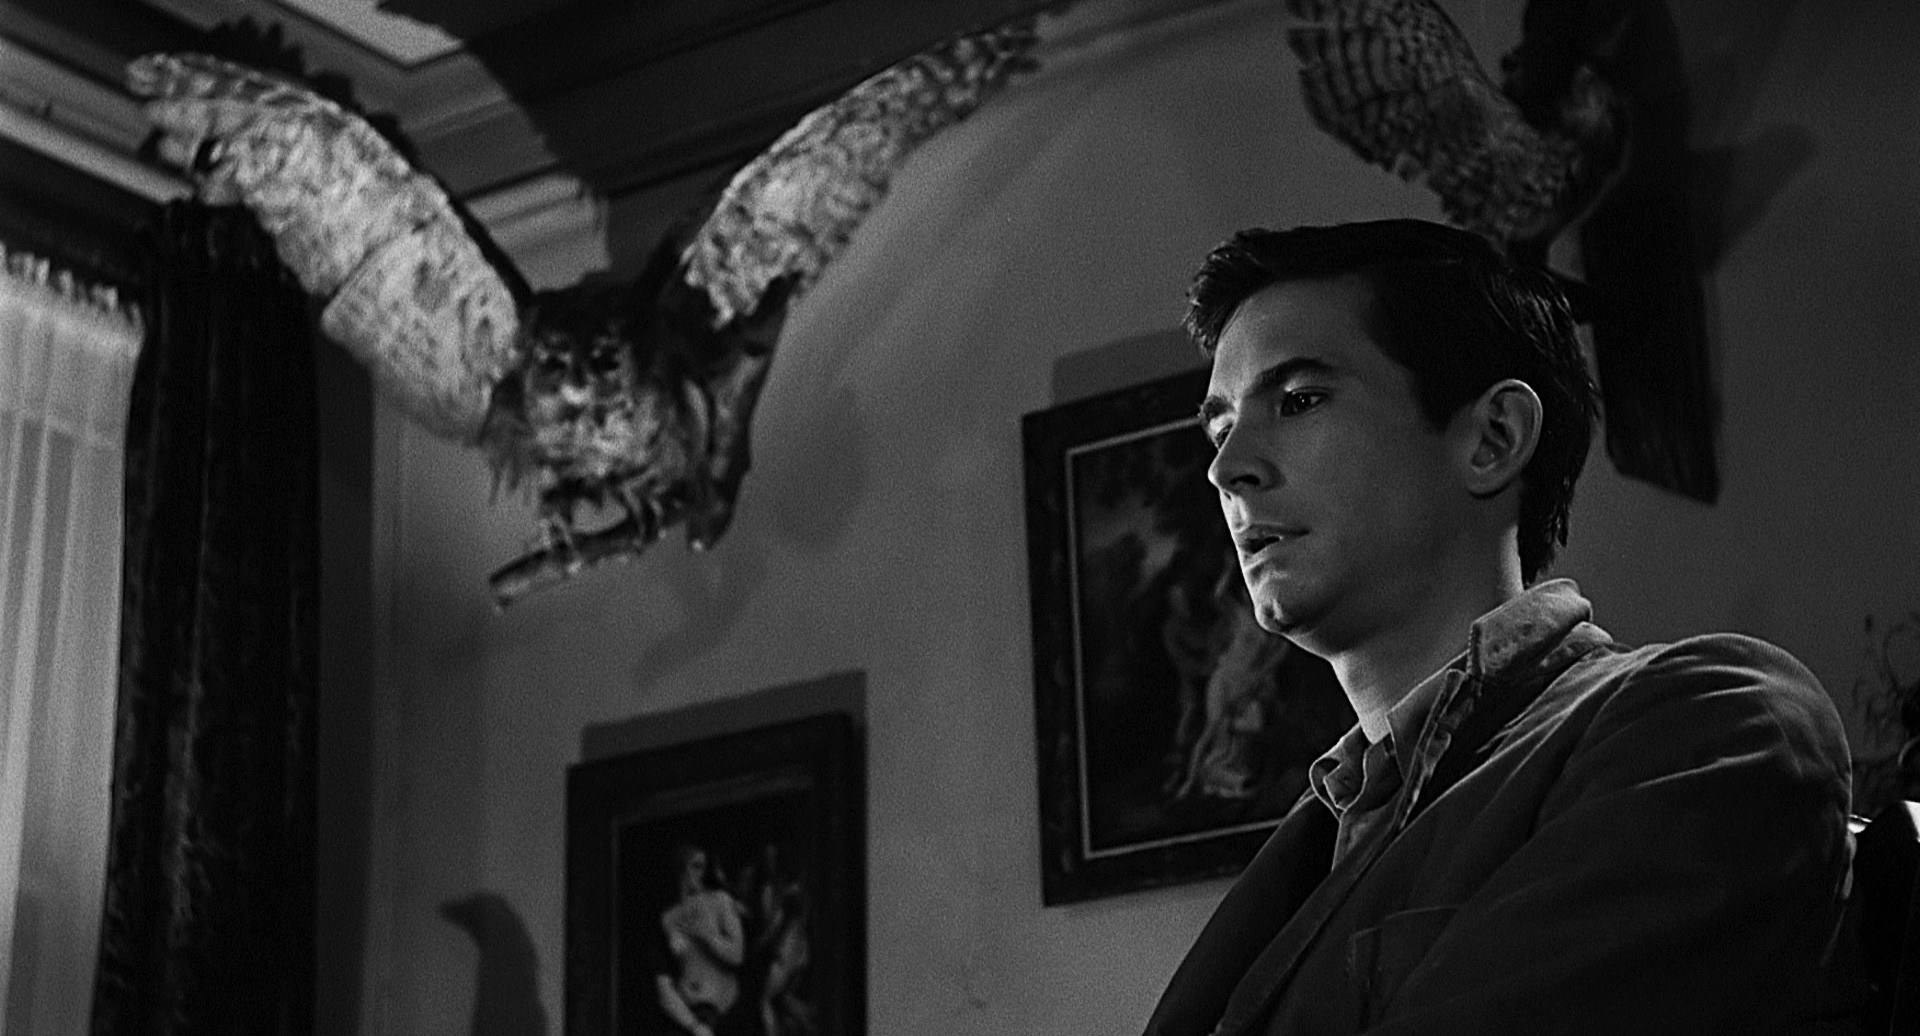 Andrew Perkins as Norman Bates, standing underneath a taxidermied owl